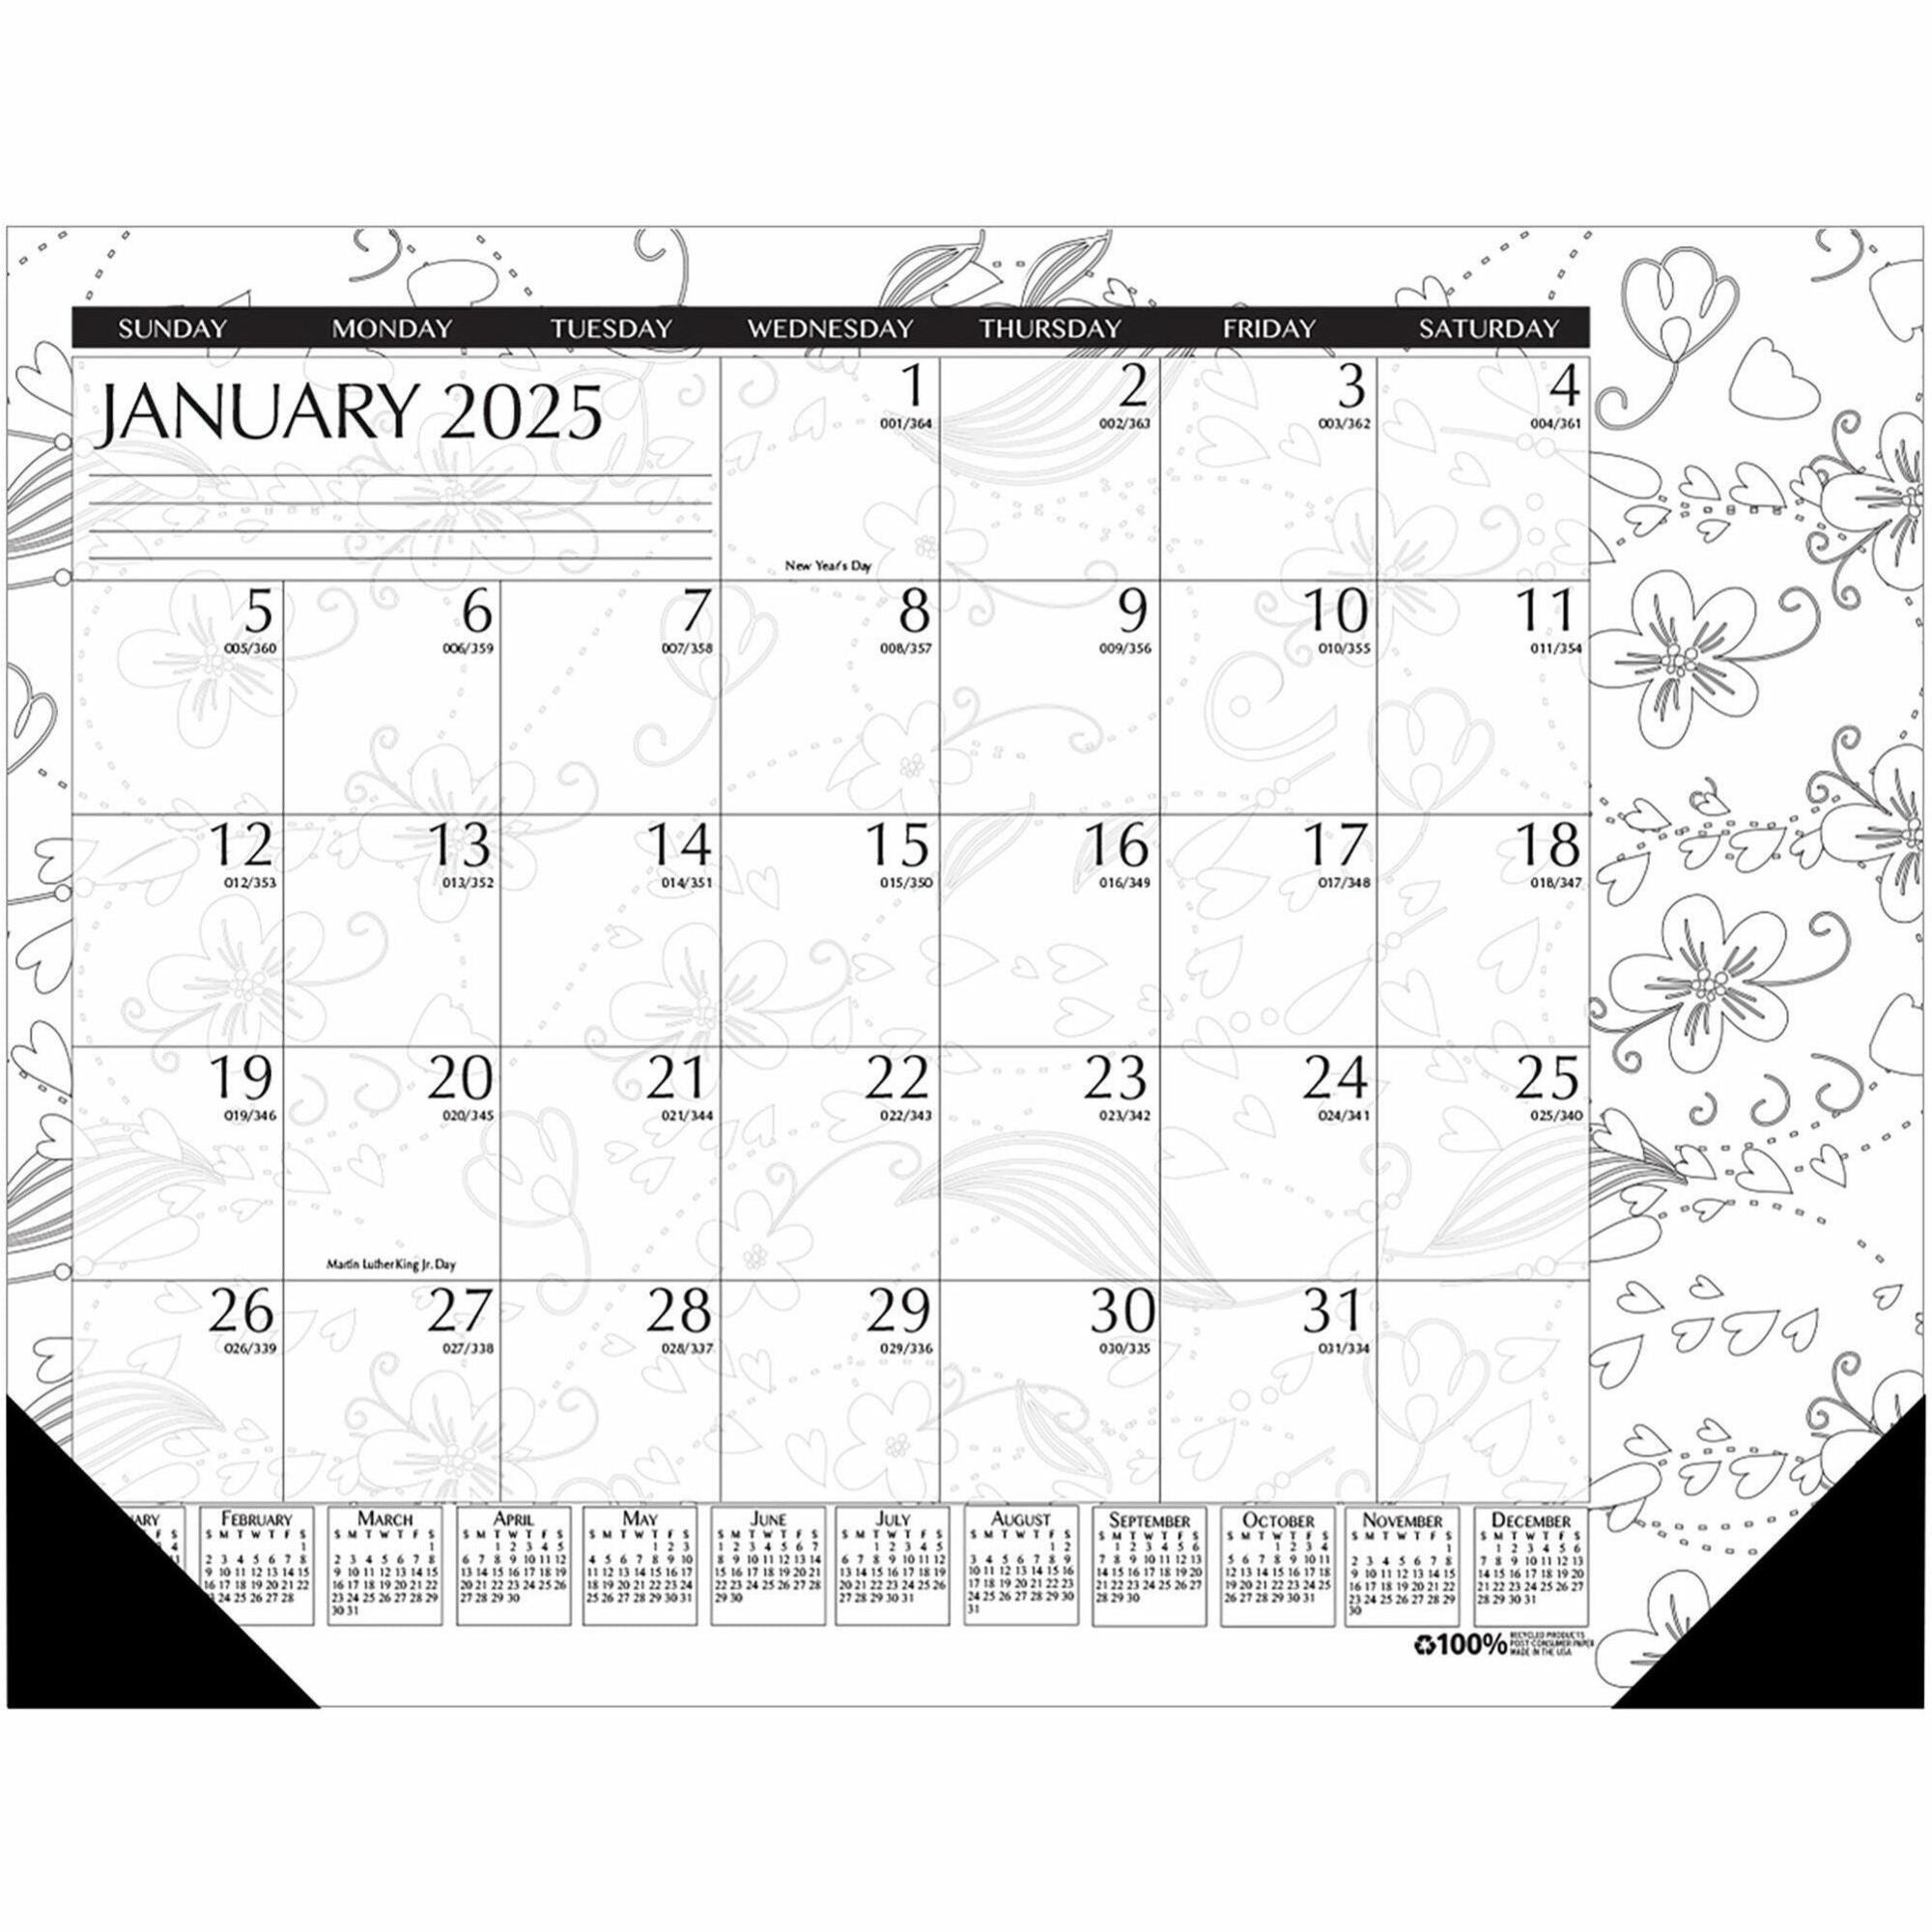 house-of-doolittle-doodle-monthly-desk-pad-julian-dates-monthly-12-month-january-2024-december-2024-1-month-single-page-layout-desk-pad-black-white-paper-13-height-x-185-width-notes-area-reference-calendar-1-each_hod1876 - 1